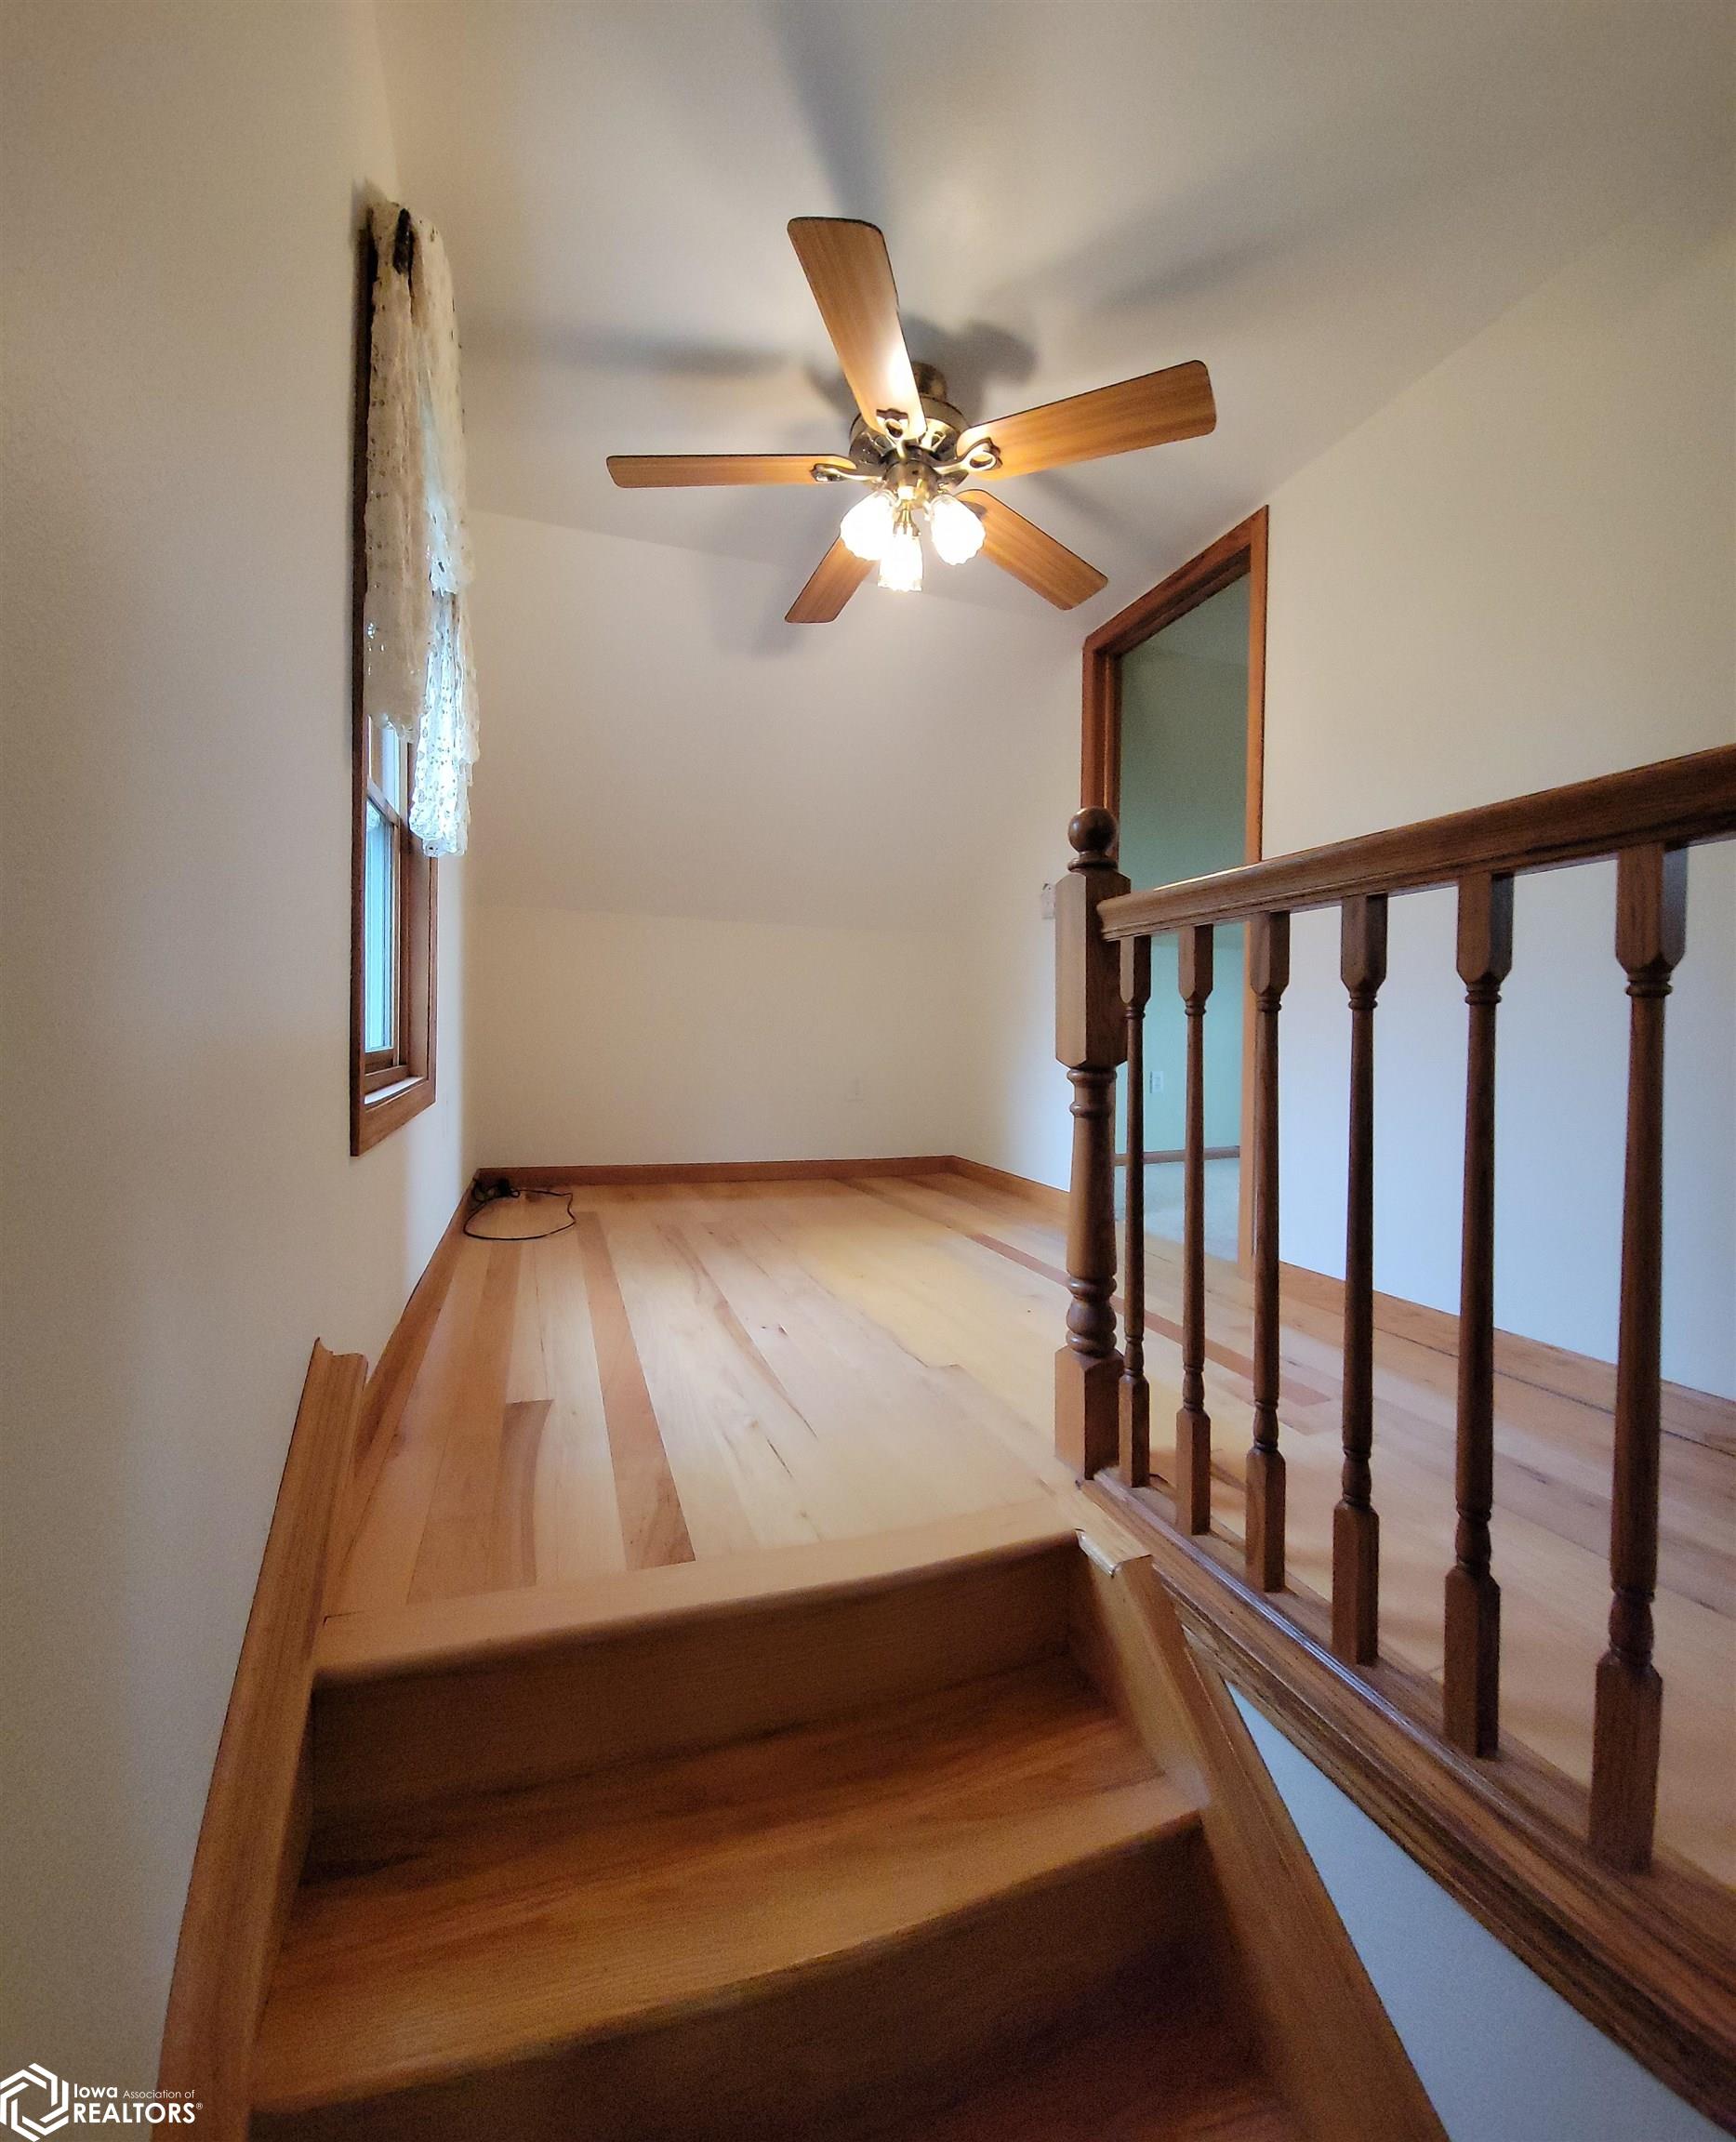 The upstairs hall has room for a small reading nook or office area.